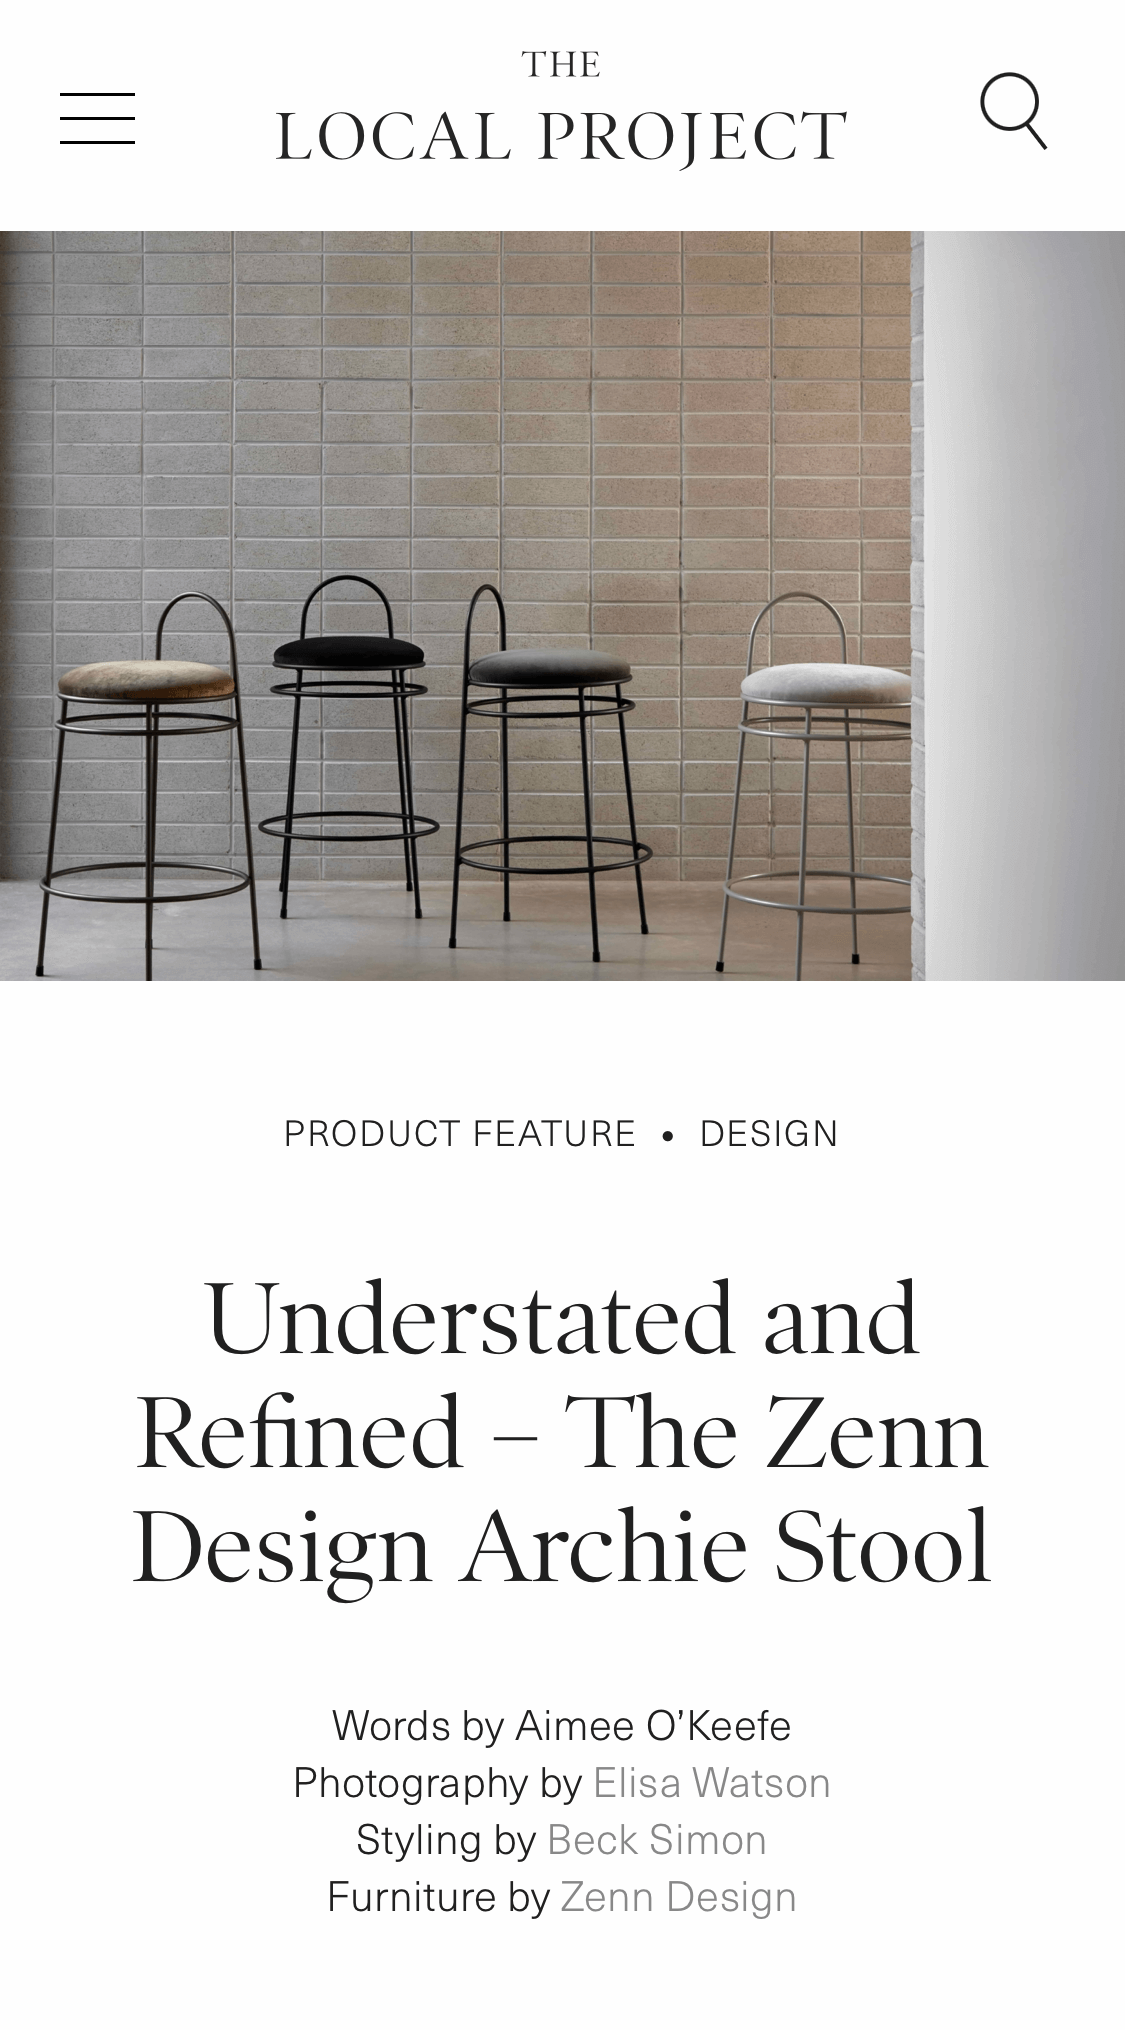 The Local Project - Understated and refined, the Zenn Design Archie Stool